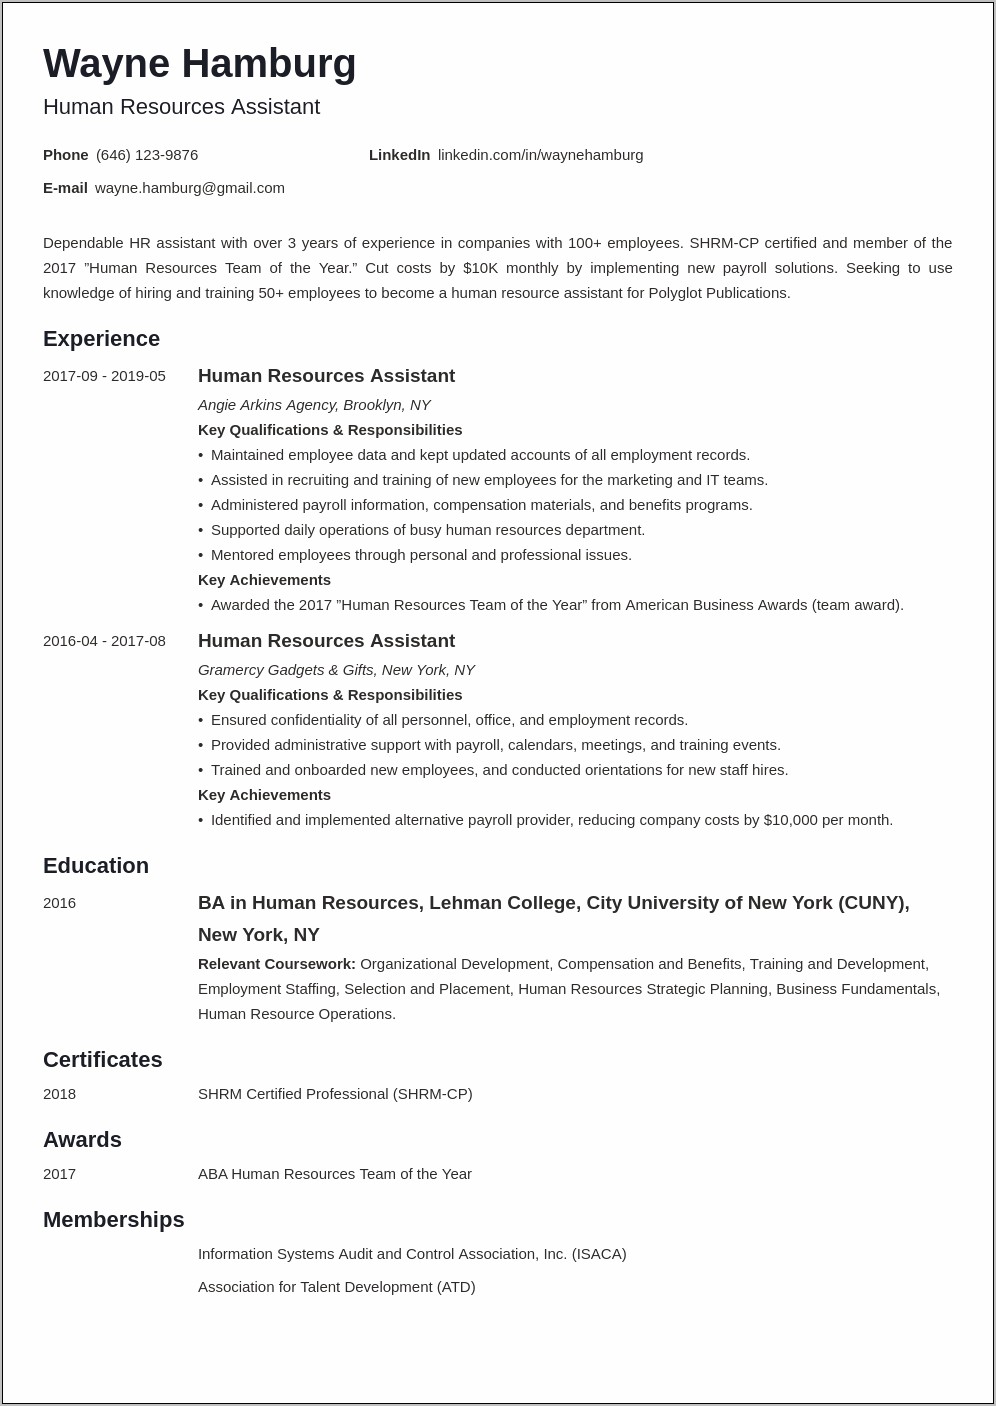 Hr Assistant Resume Objective Statements